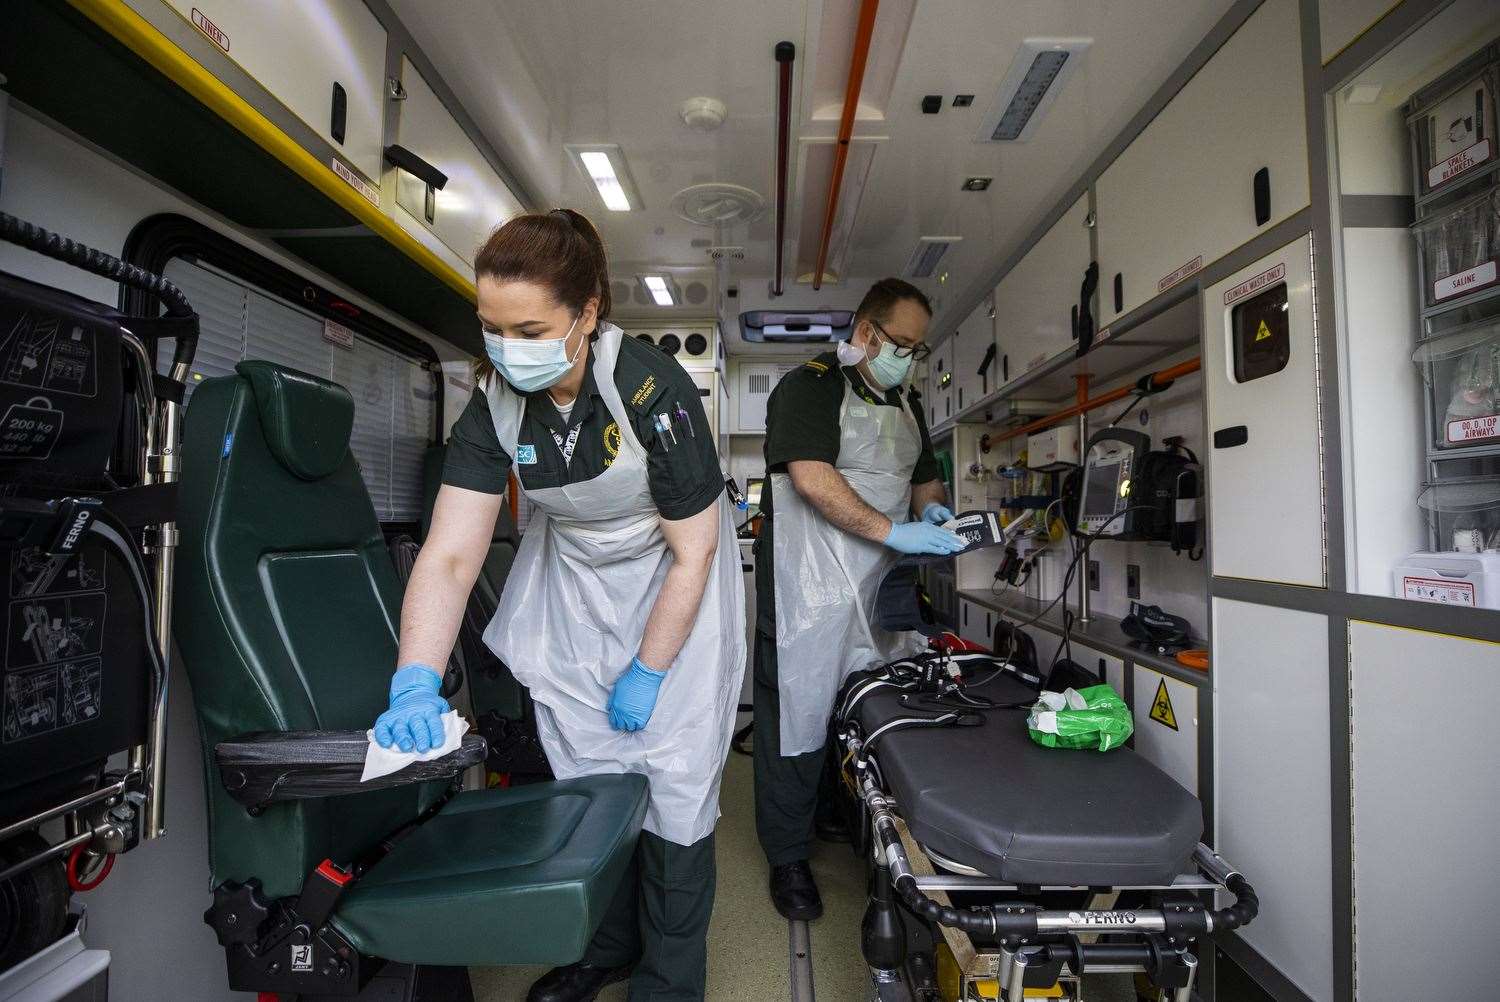 Ruth Corscadden and Daniel McCollam cleaning the ambulance after bringing a patient to the Causeway Hospital (Liam McBurney/PA)